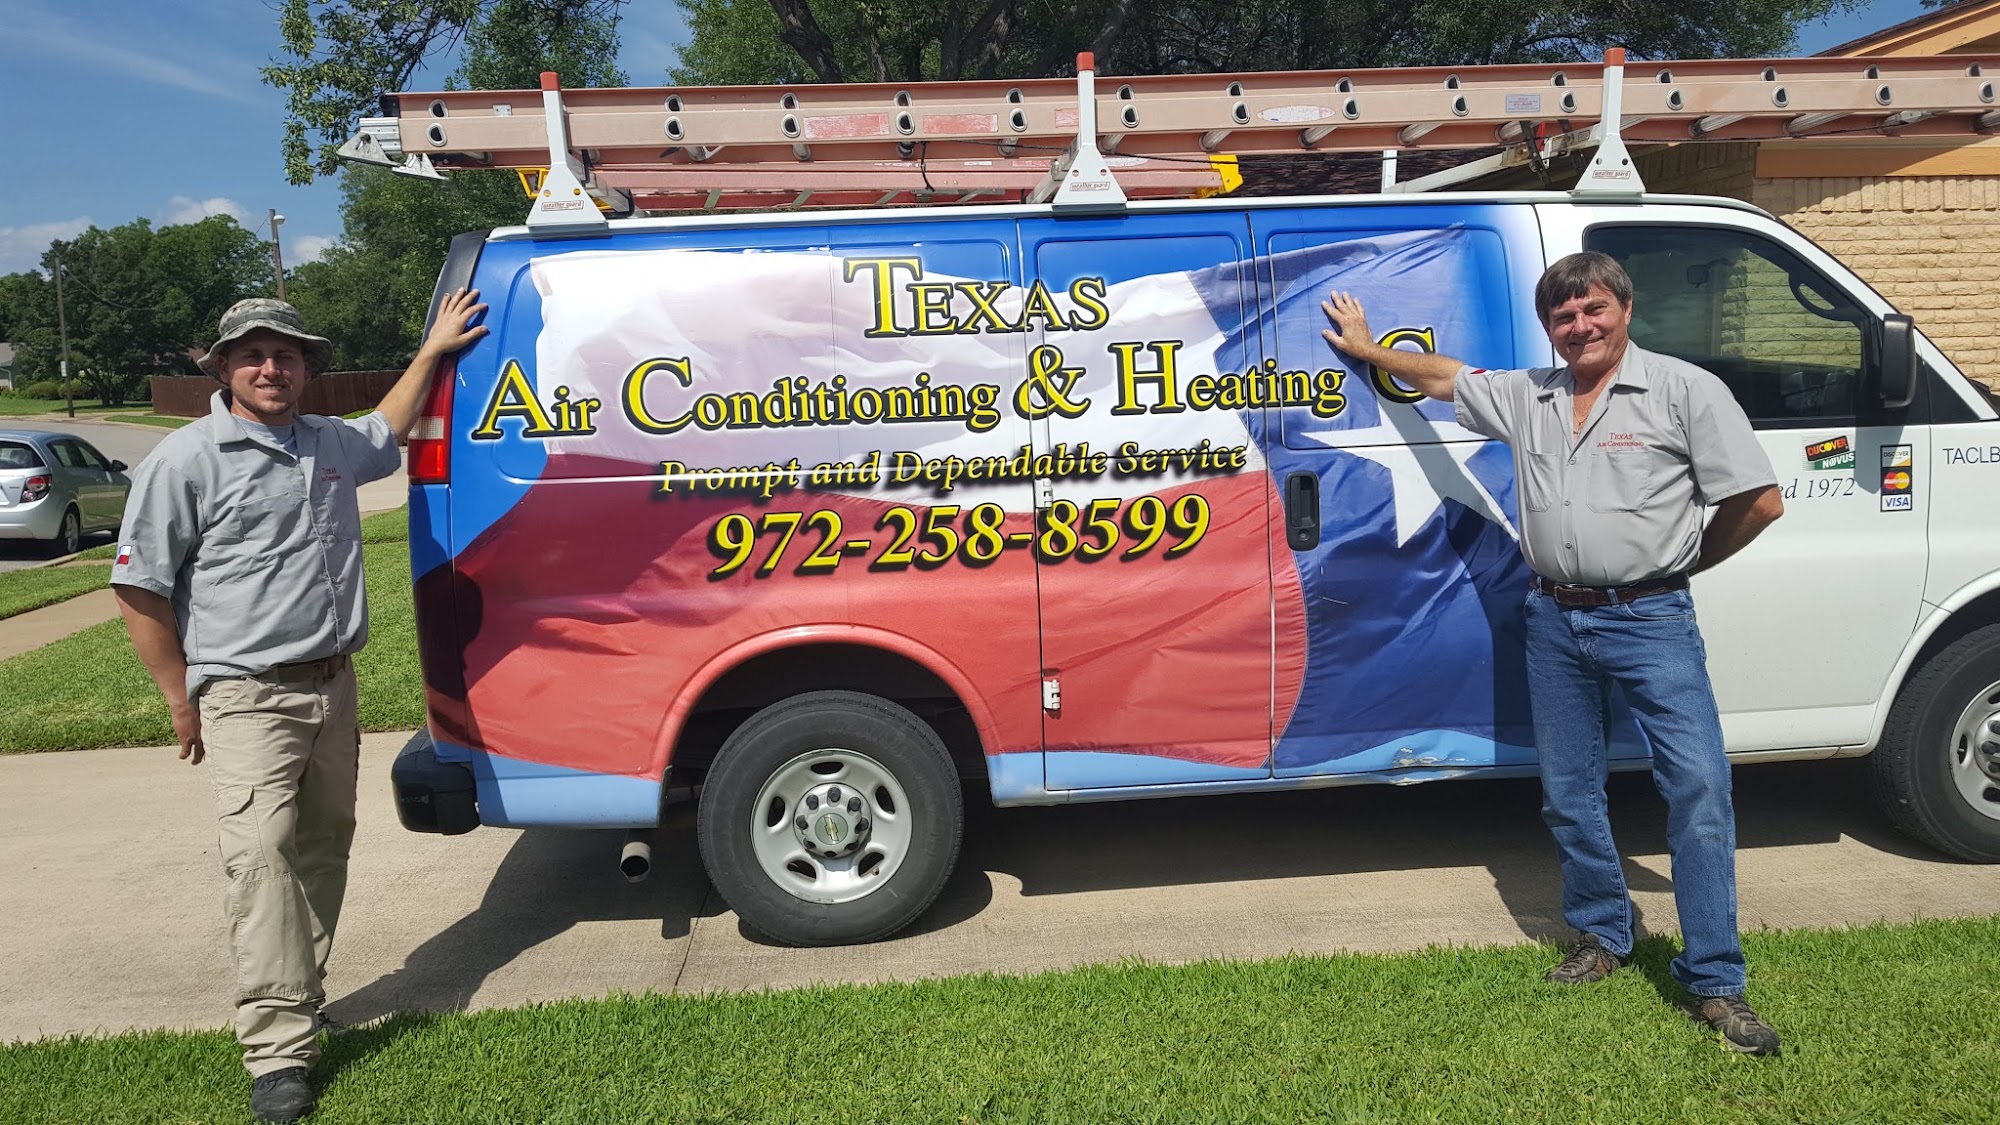 Texas Air Conditioning and Heating